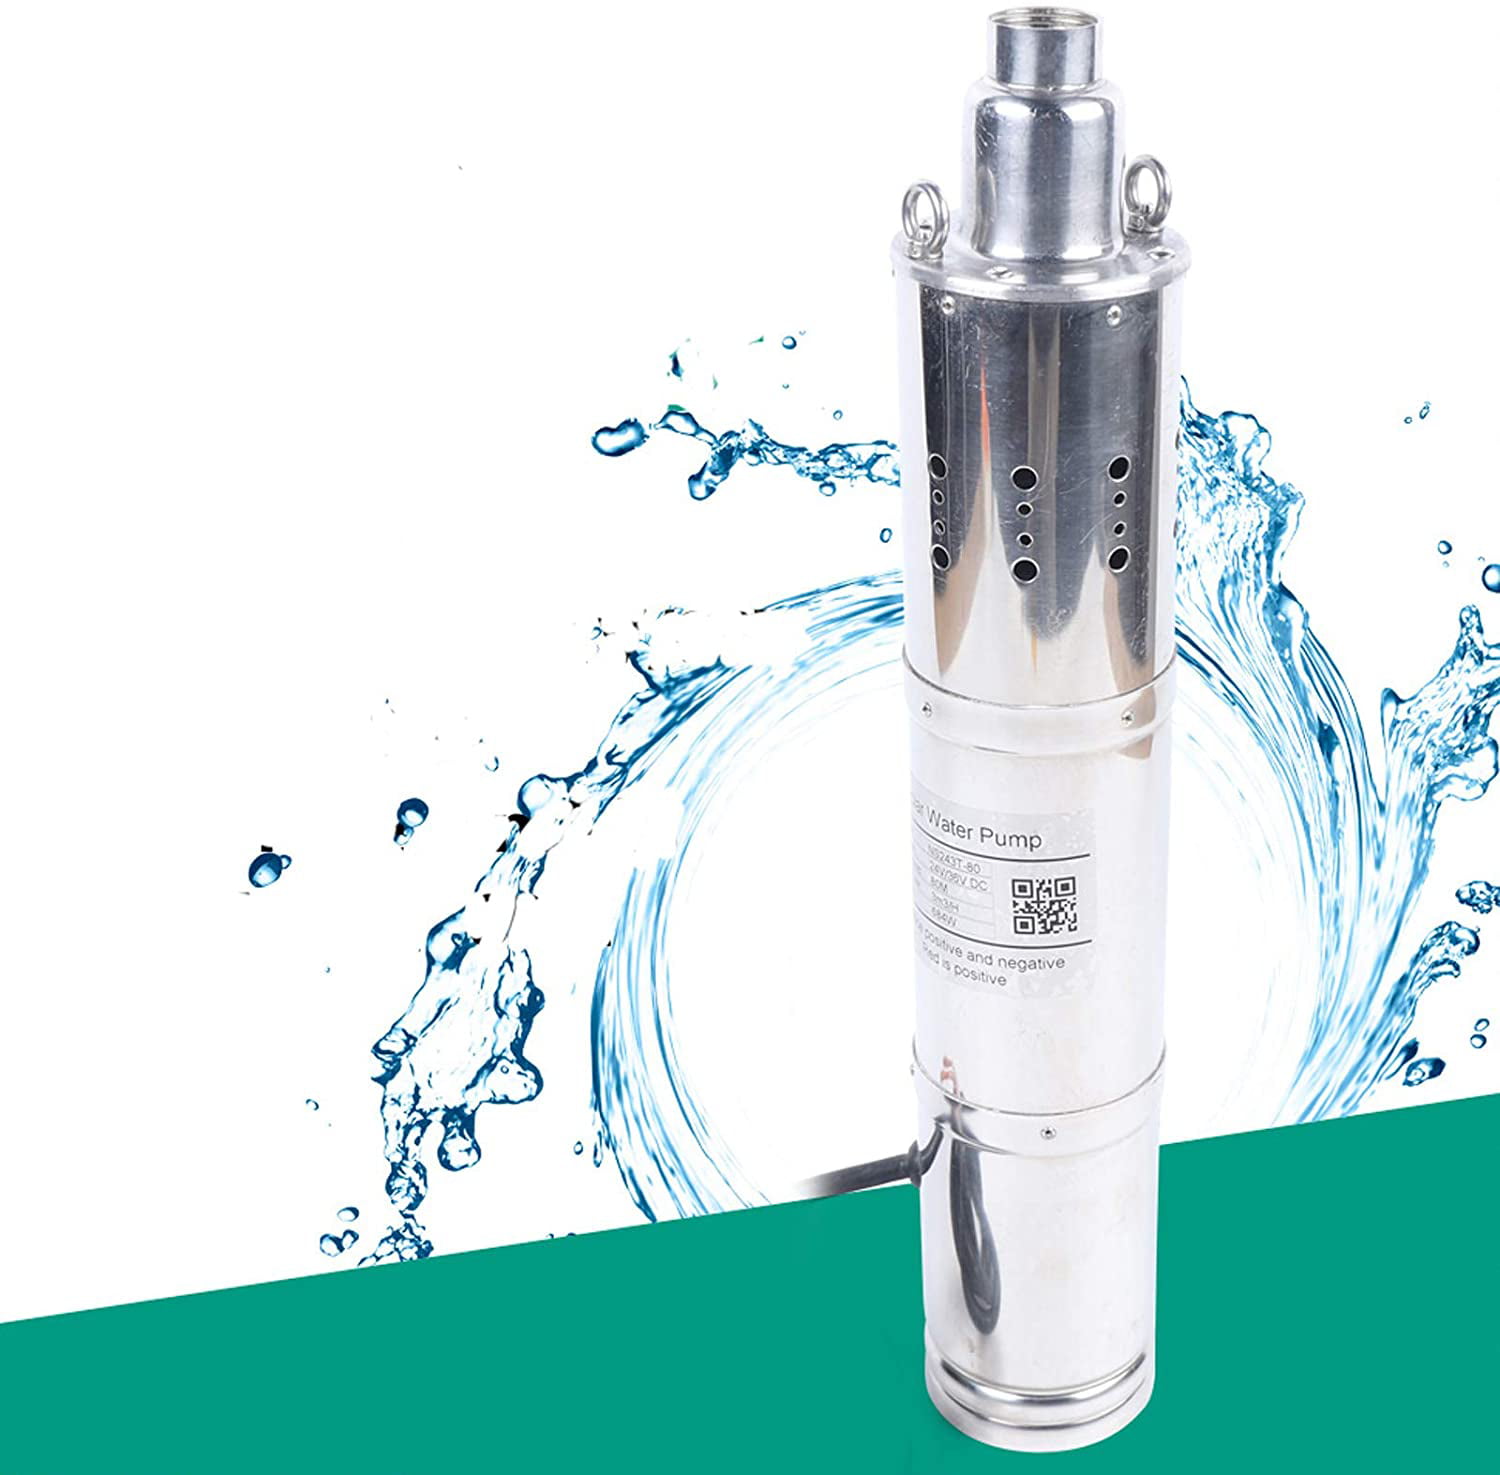 DC 24V Solar Deep Well Screw Submersible Water Pump 684W,Stainless Steel,3.5'' 